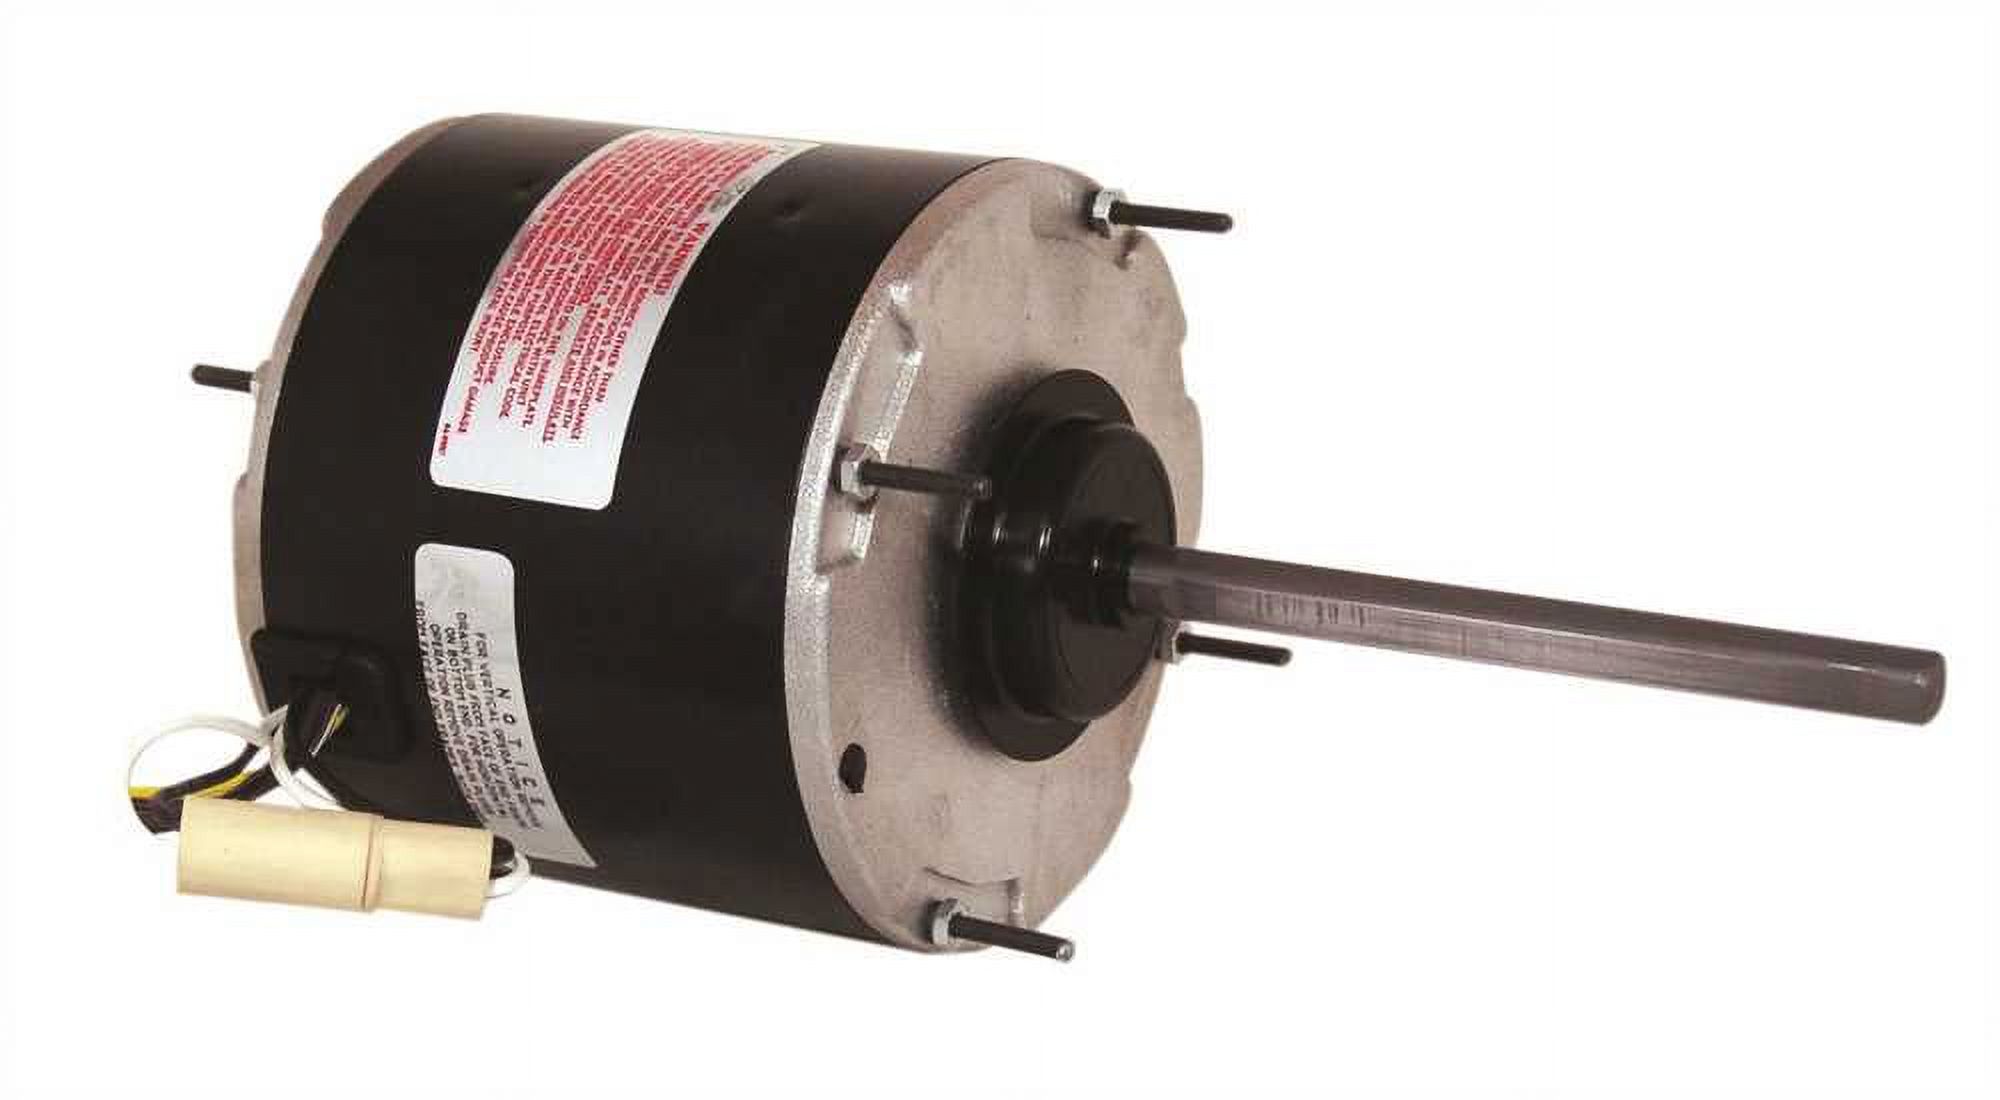 Century FSE1056SV1 OUTDOOR CONDENSER FAN MOTOR, 5-5/8 IN., 208 / 230 VOLTS, 4.2 AMPS, 1/2 HP, 1,075 RPM - image 2 of 2